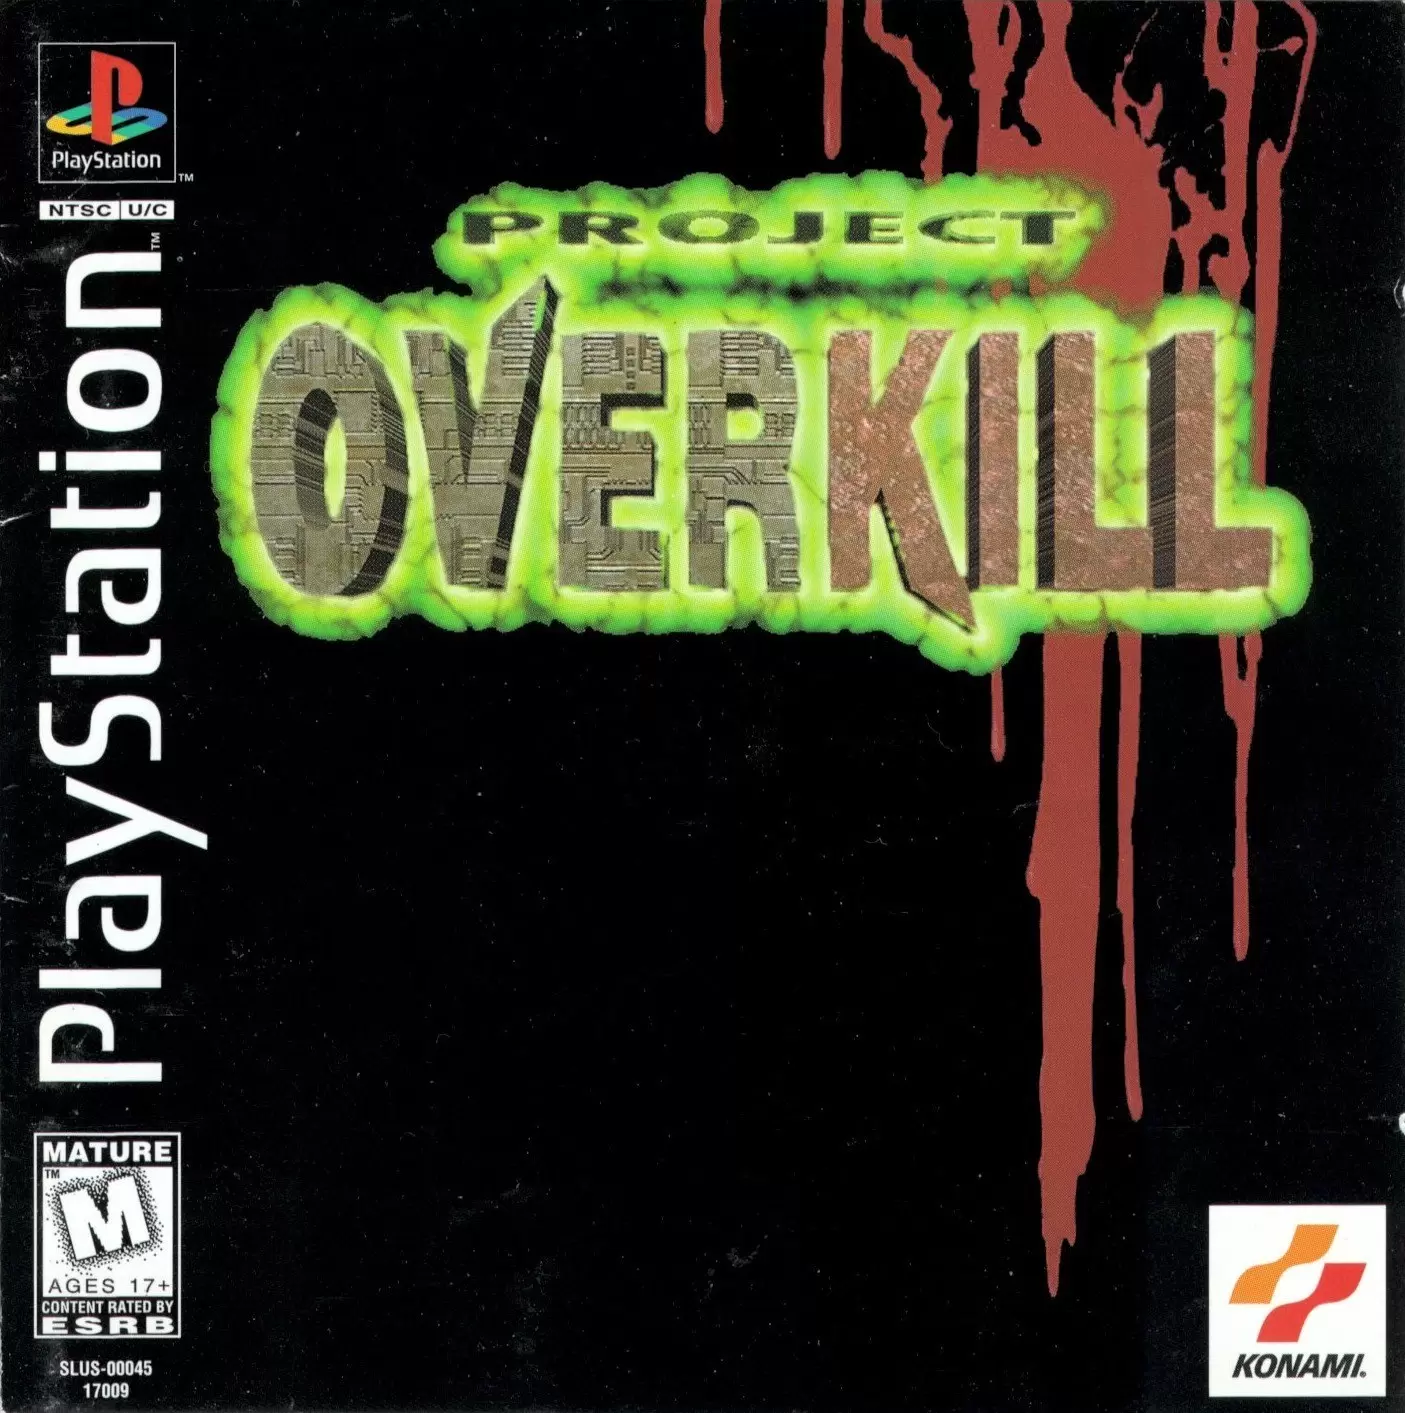 Playstation games - Project Overkill